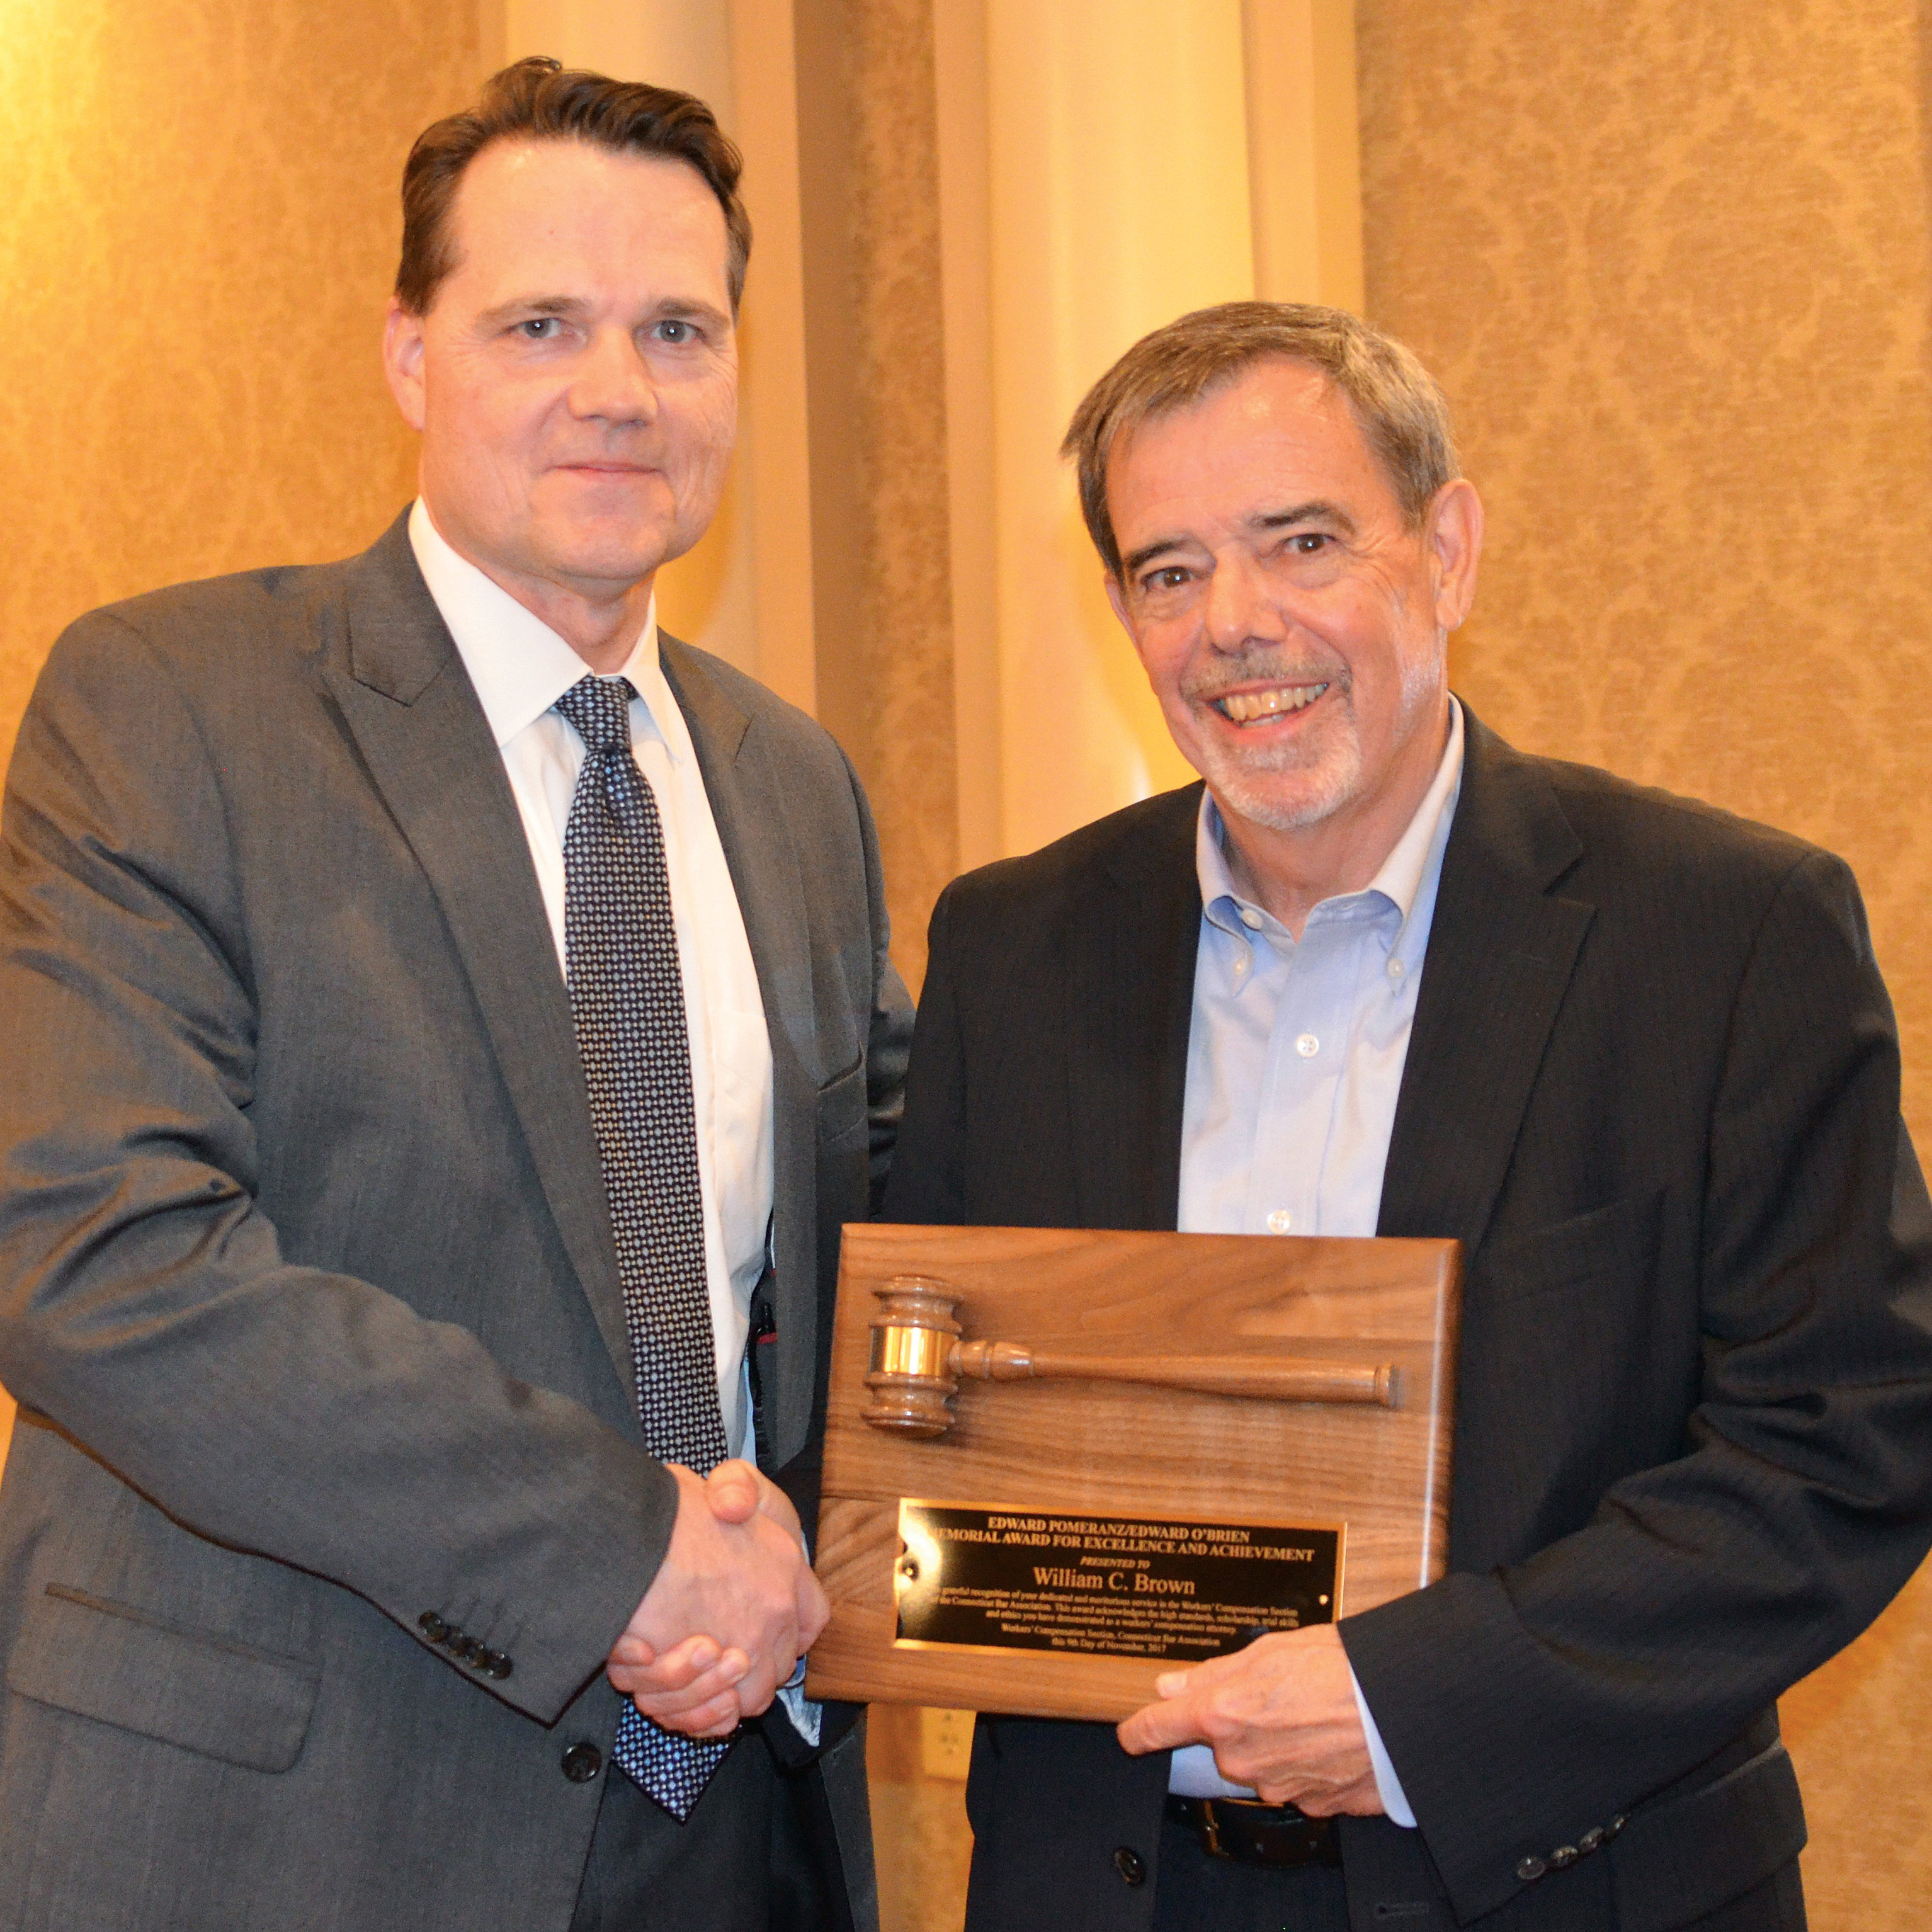 (L to R) CBA Workers’ Compensation Section Chair Francis X. Drapeau with the Pomeranz-O’Brien Award recipient William C. Brown.